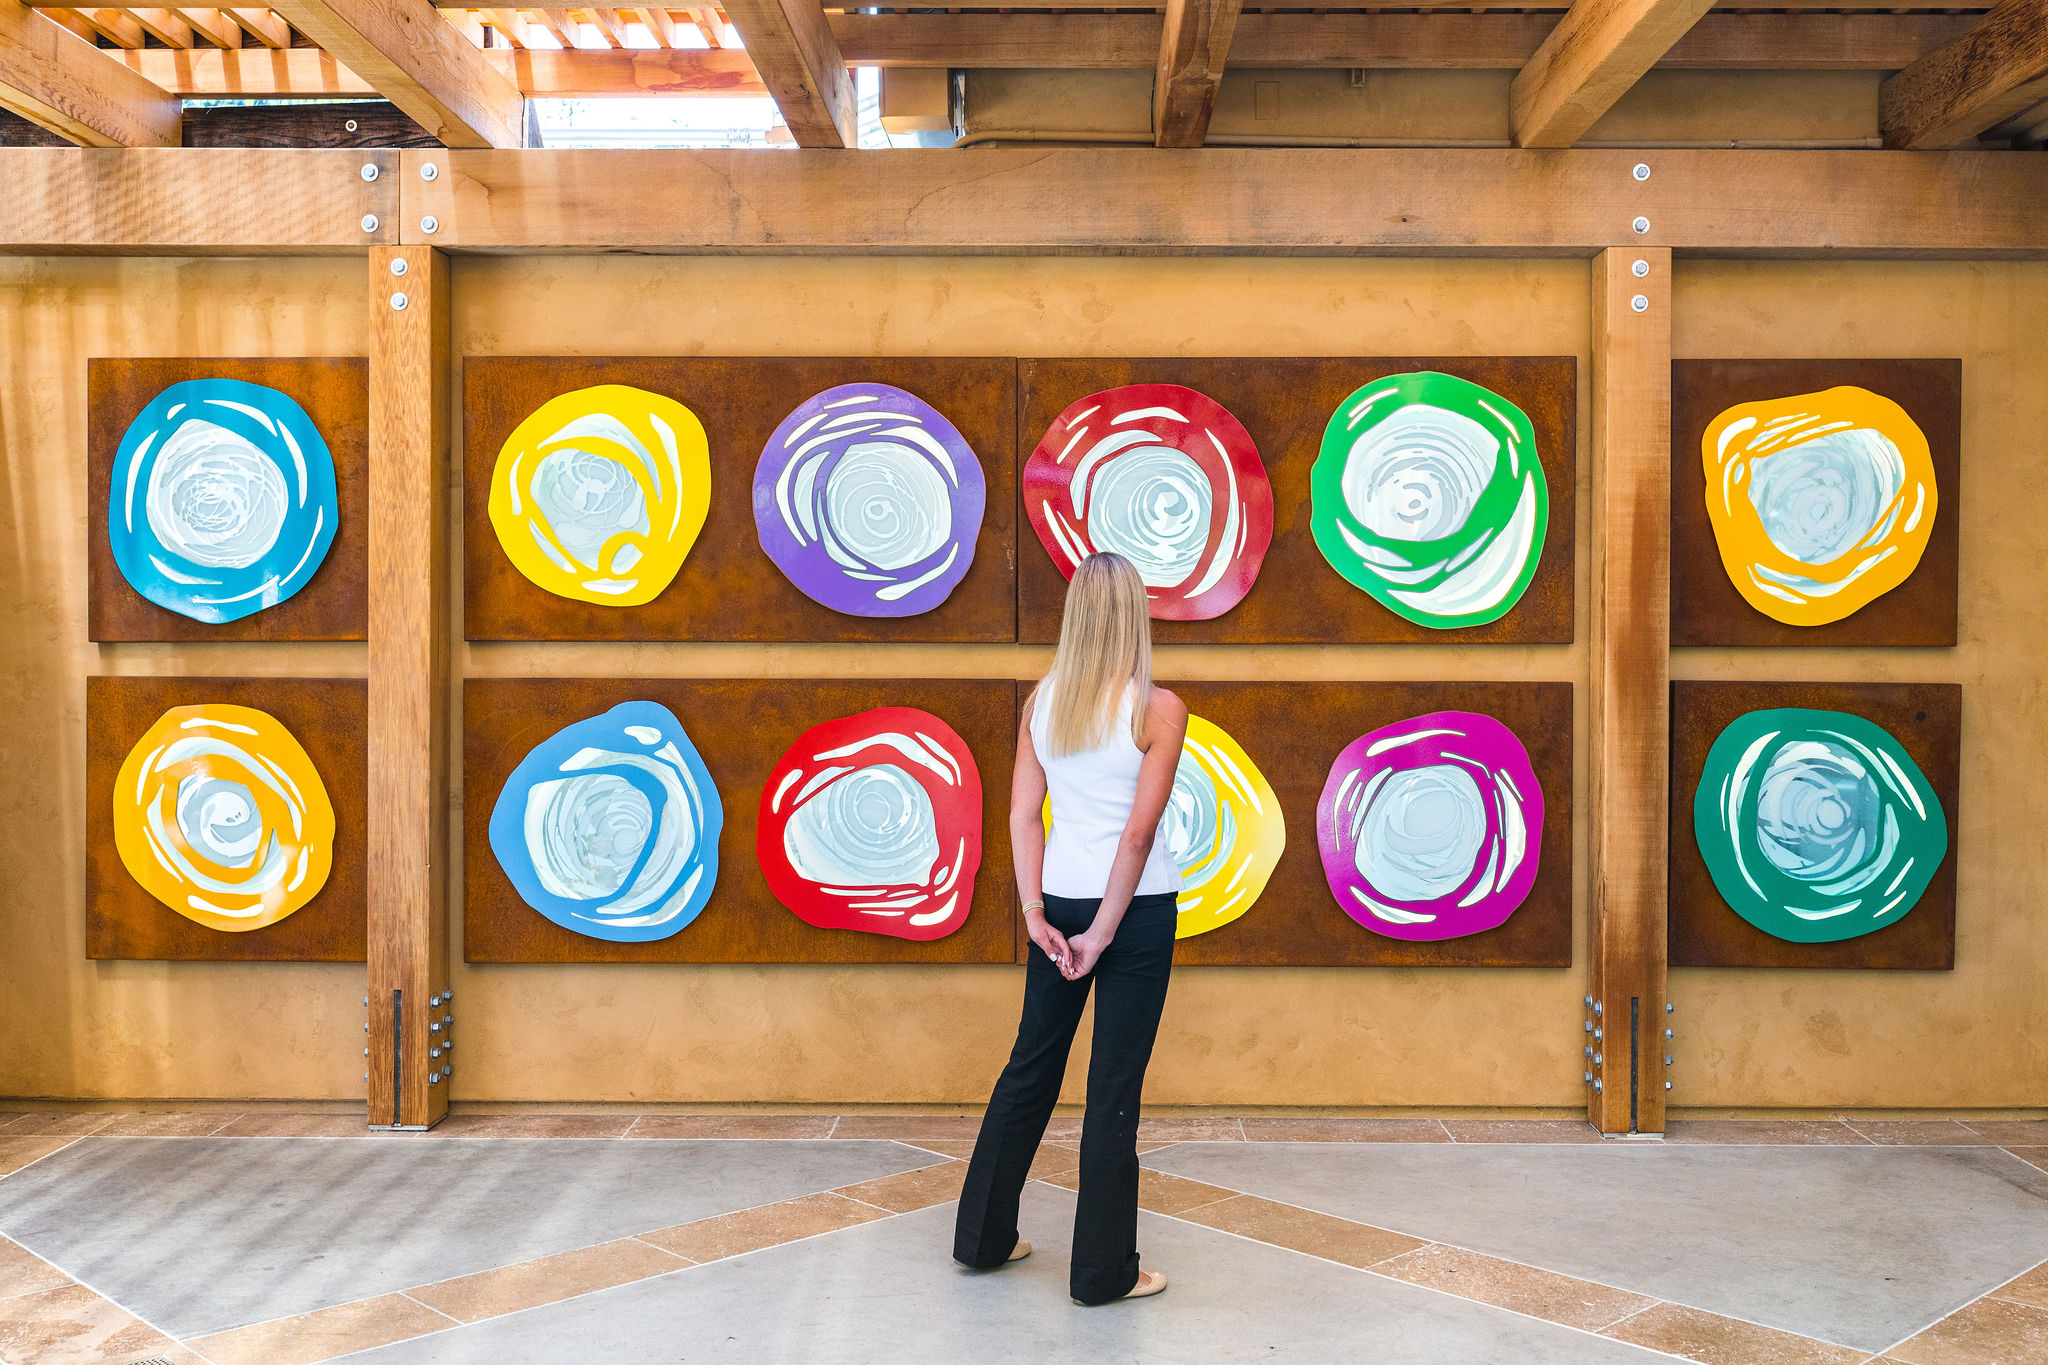 "L'Esprit du Soleil" the new multi-panel art piece at Auberge du Soleil, by artist Gordon Huether, conveys the vibrant colors of life, vitality and the abundant natural beauty of Napa Valley.